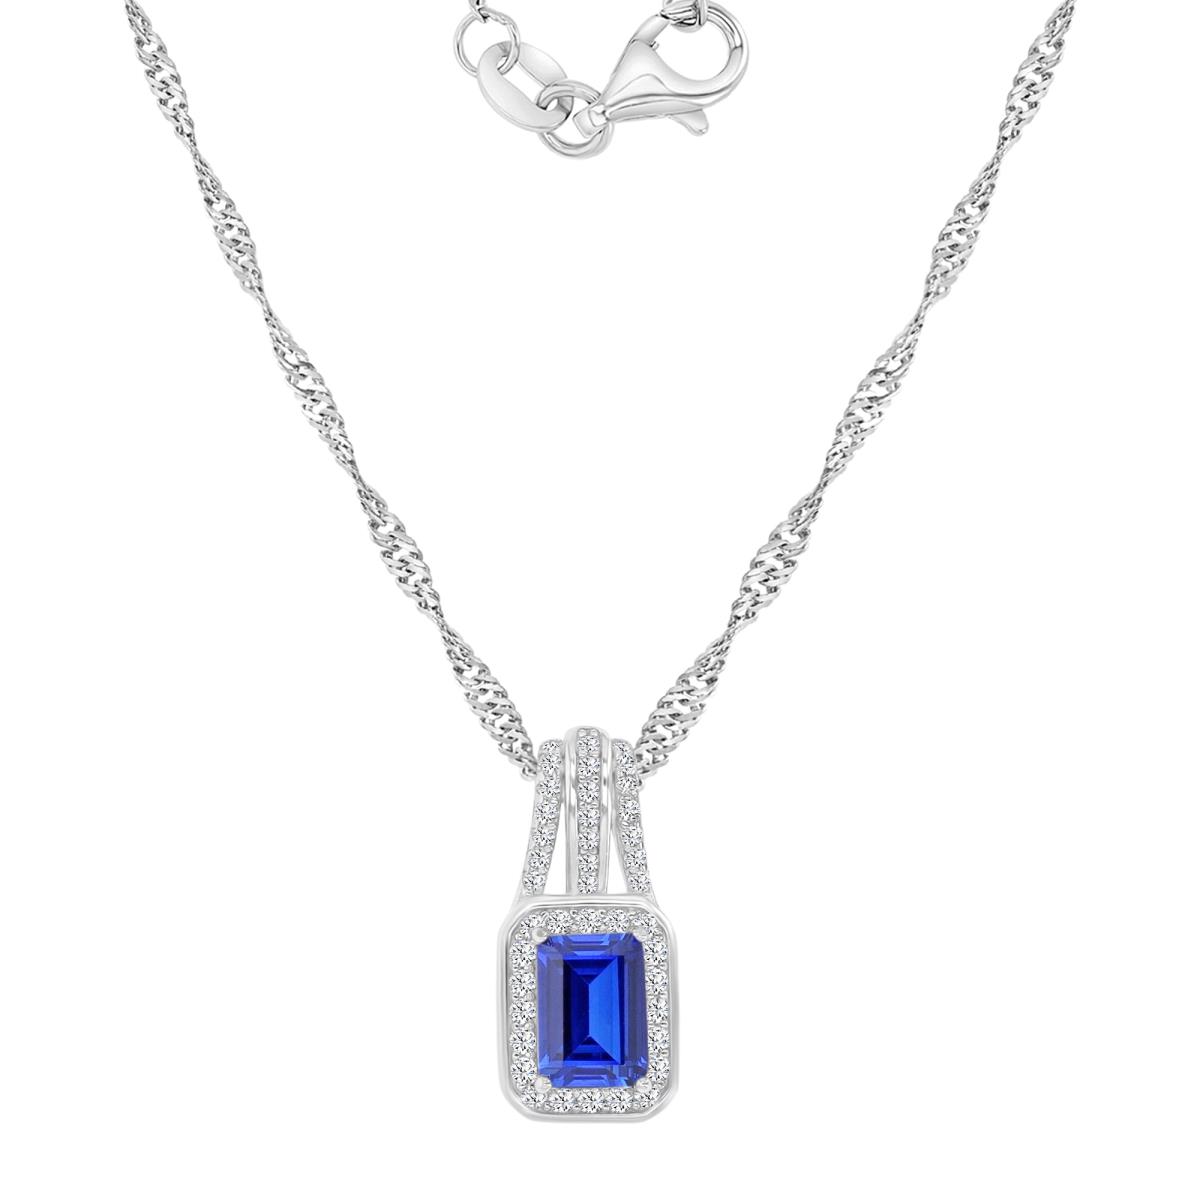 Sterling Silver Rhodium 18X8.3MM Polished Cr Blue & Cr White Sapphire Emerald Cut Dangling Pendant Singapore Chain 18+2" Necklace